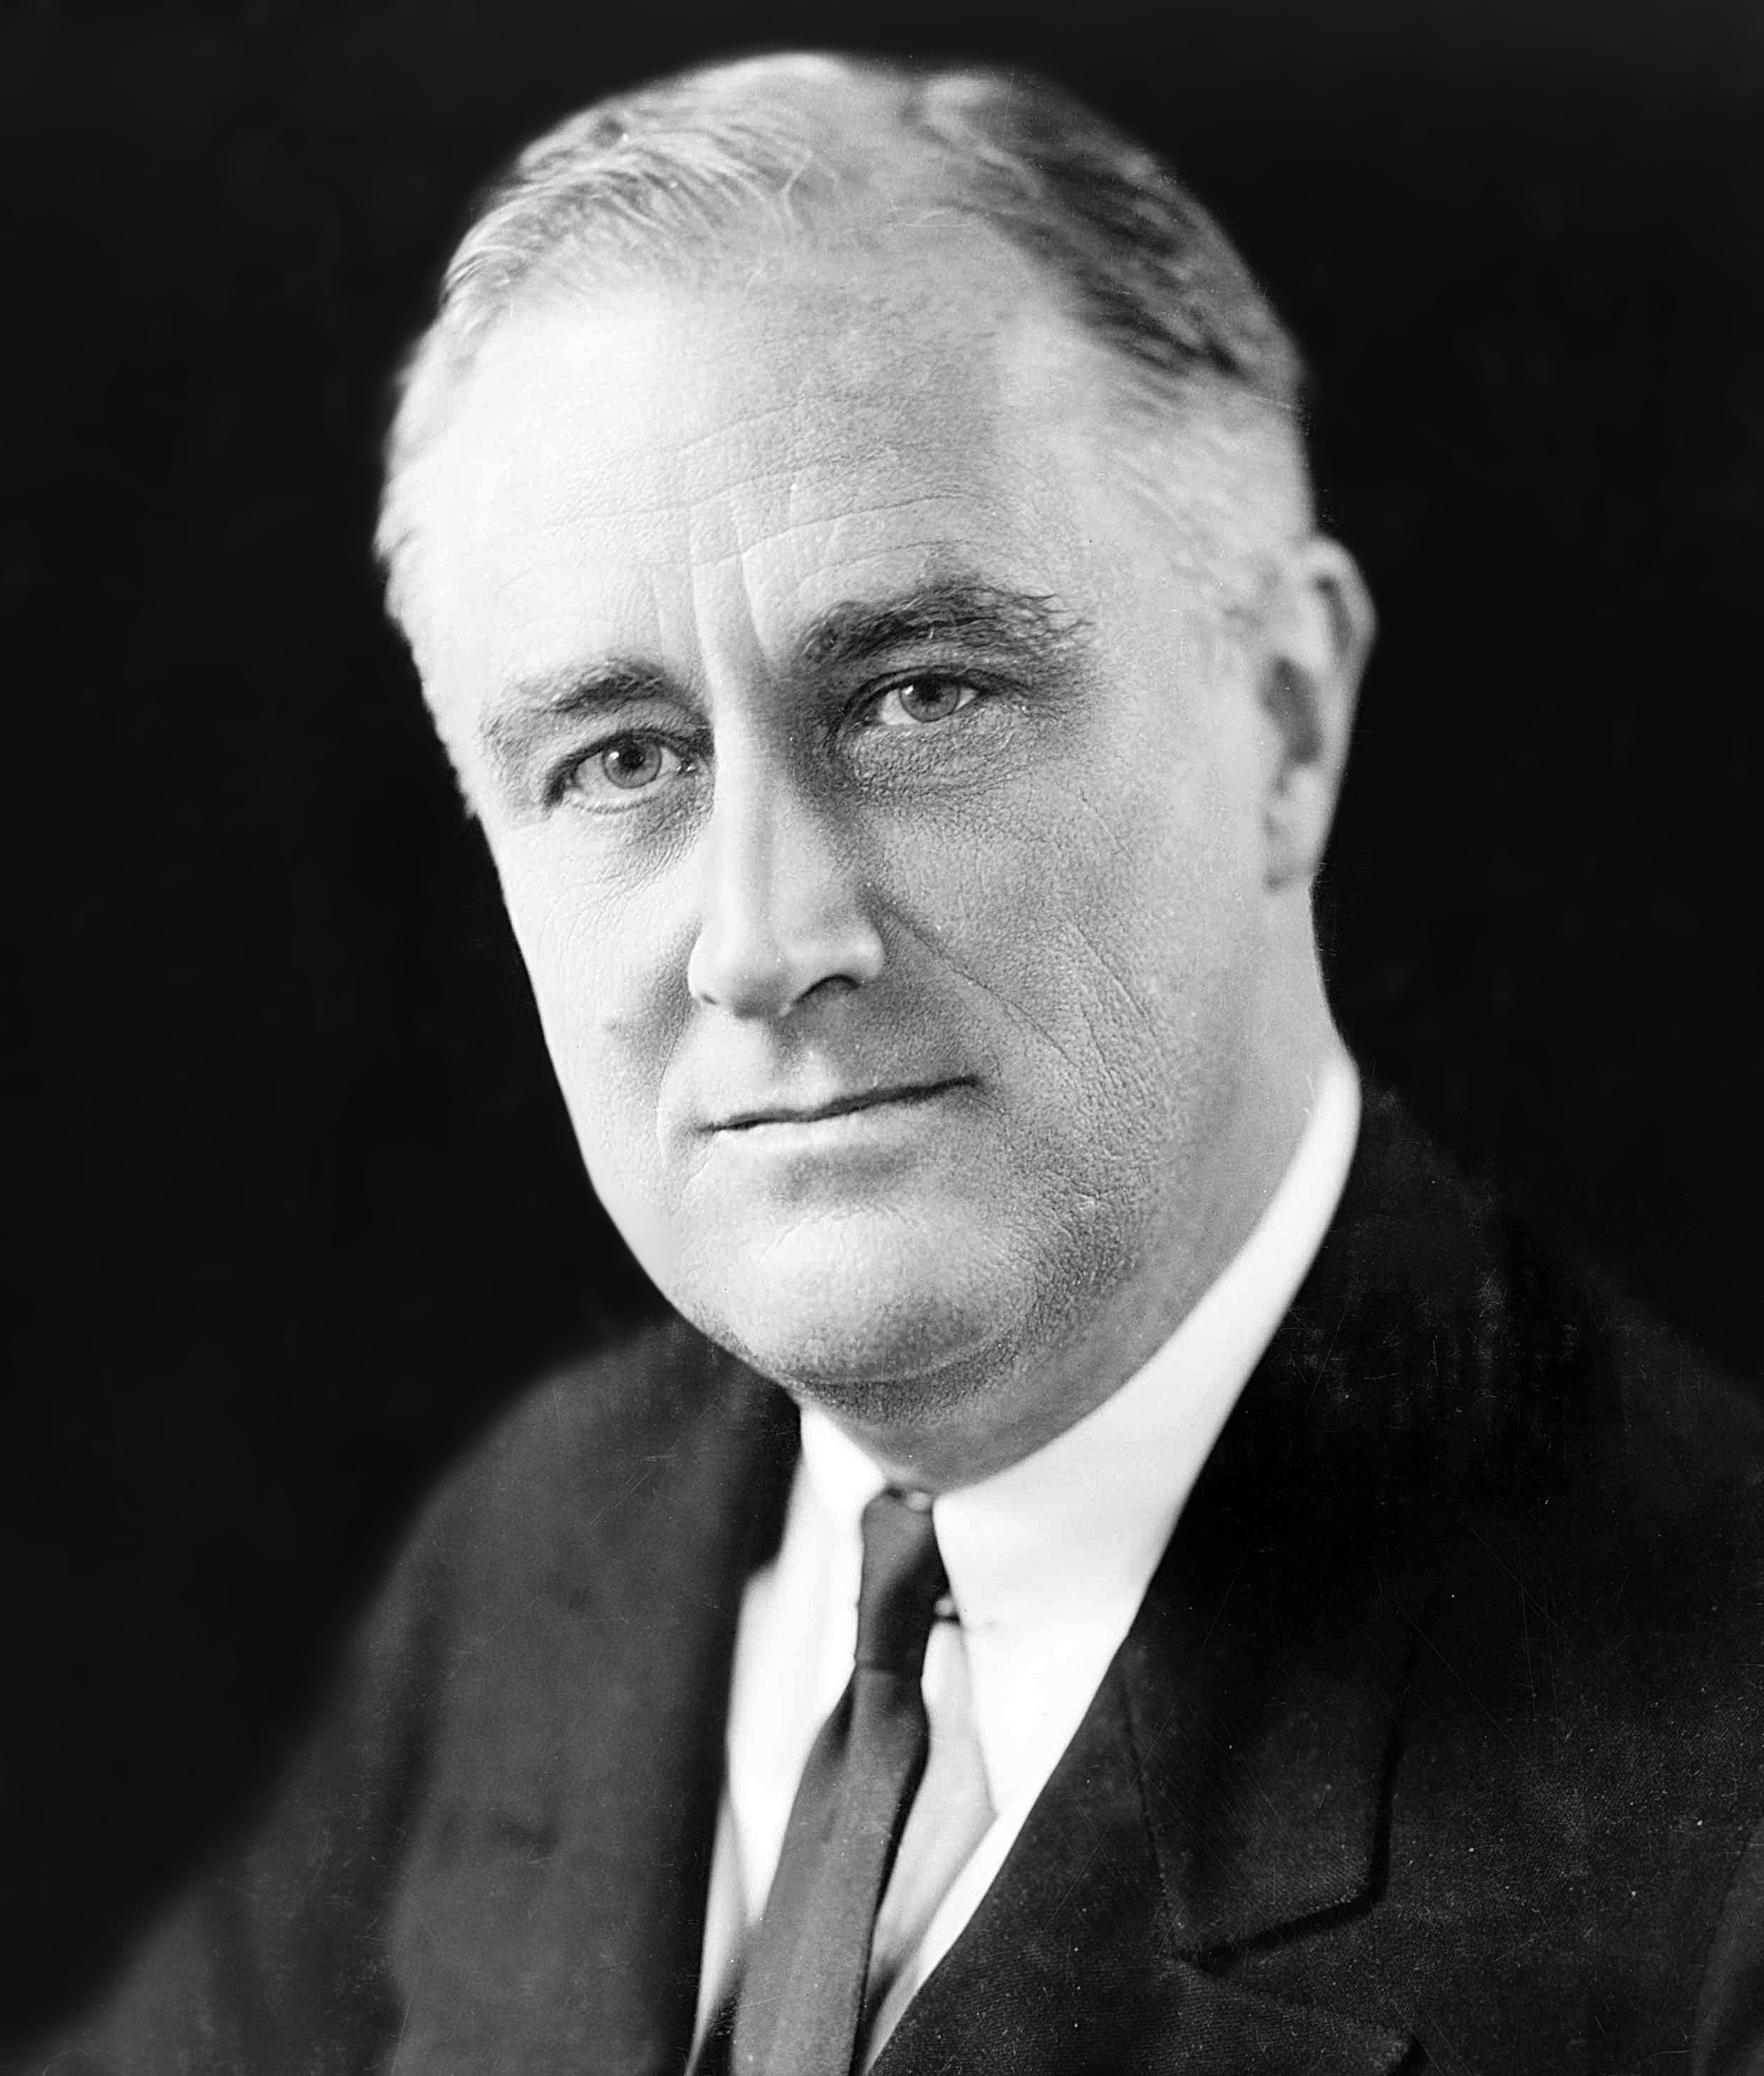 A photograph of FDR